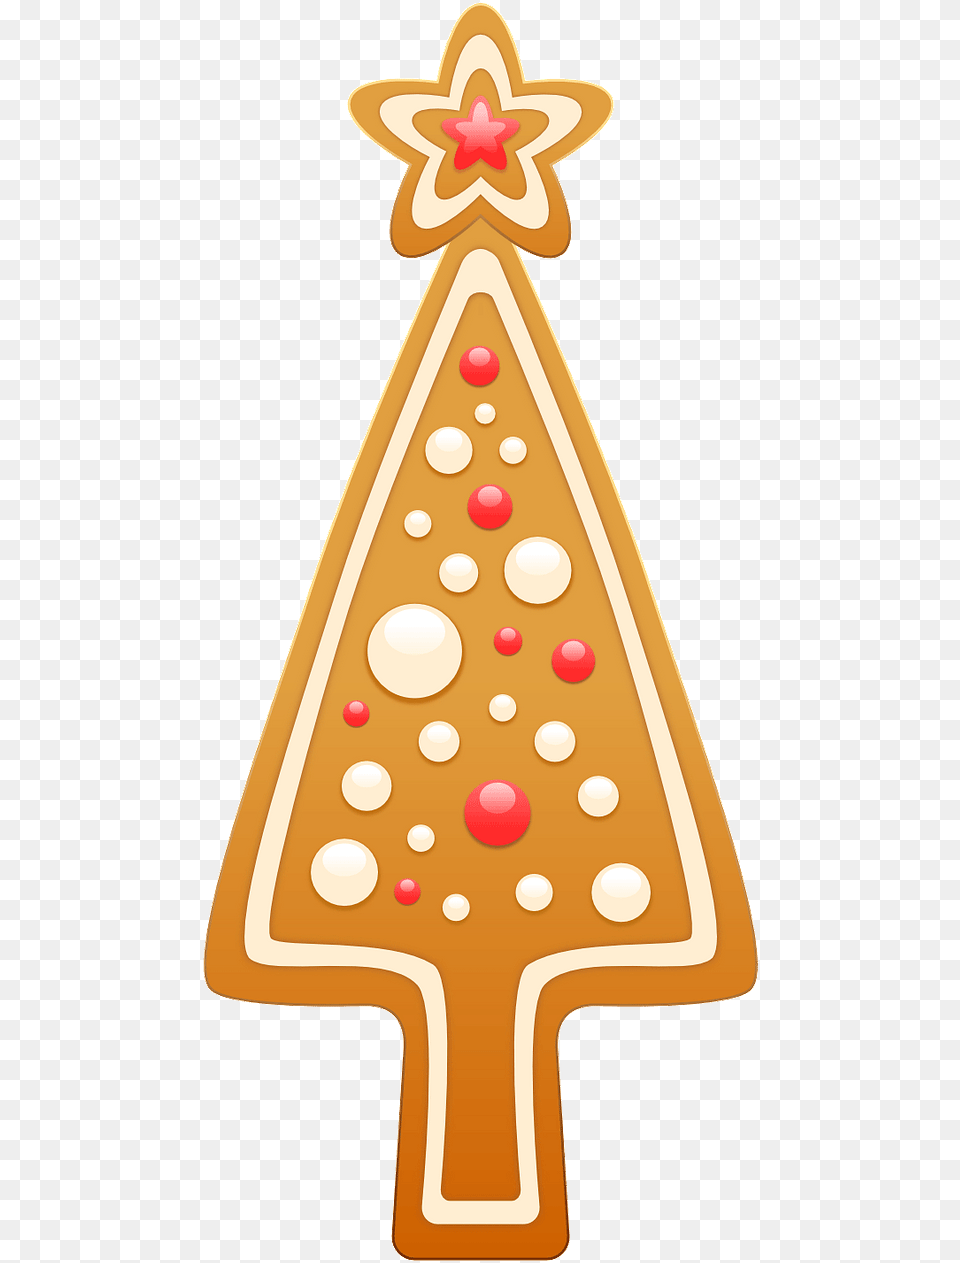 Gingerbread Christmas Tree Clipart Free Download Christmas Tree, Food, Sweets, Cookie, Qr Code Png